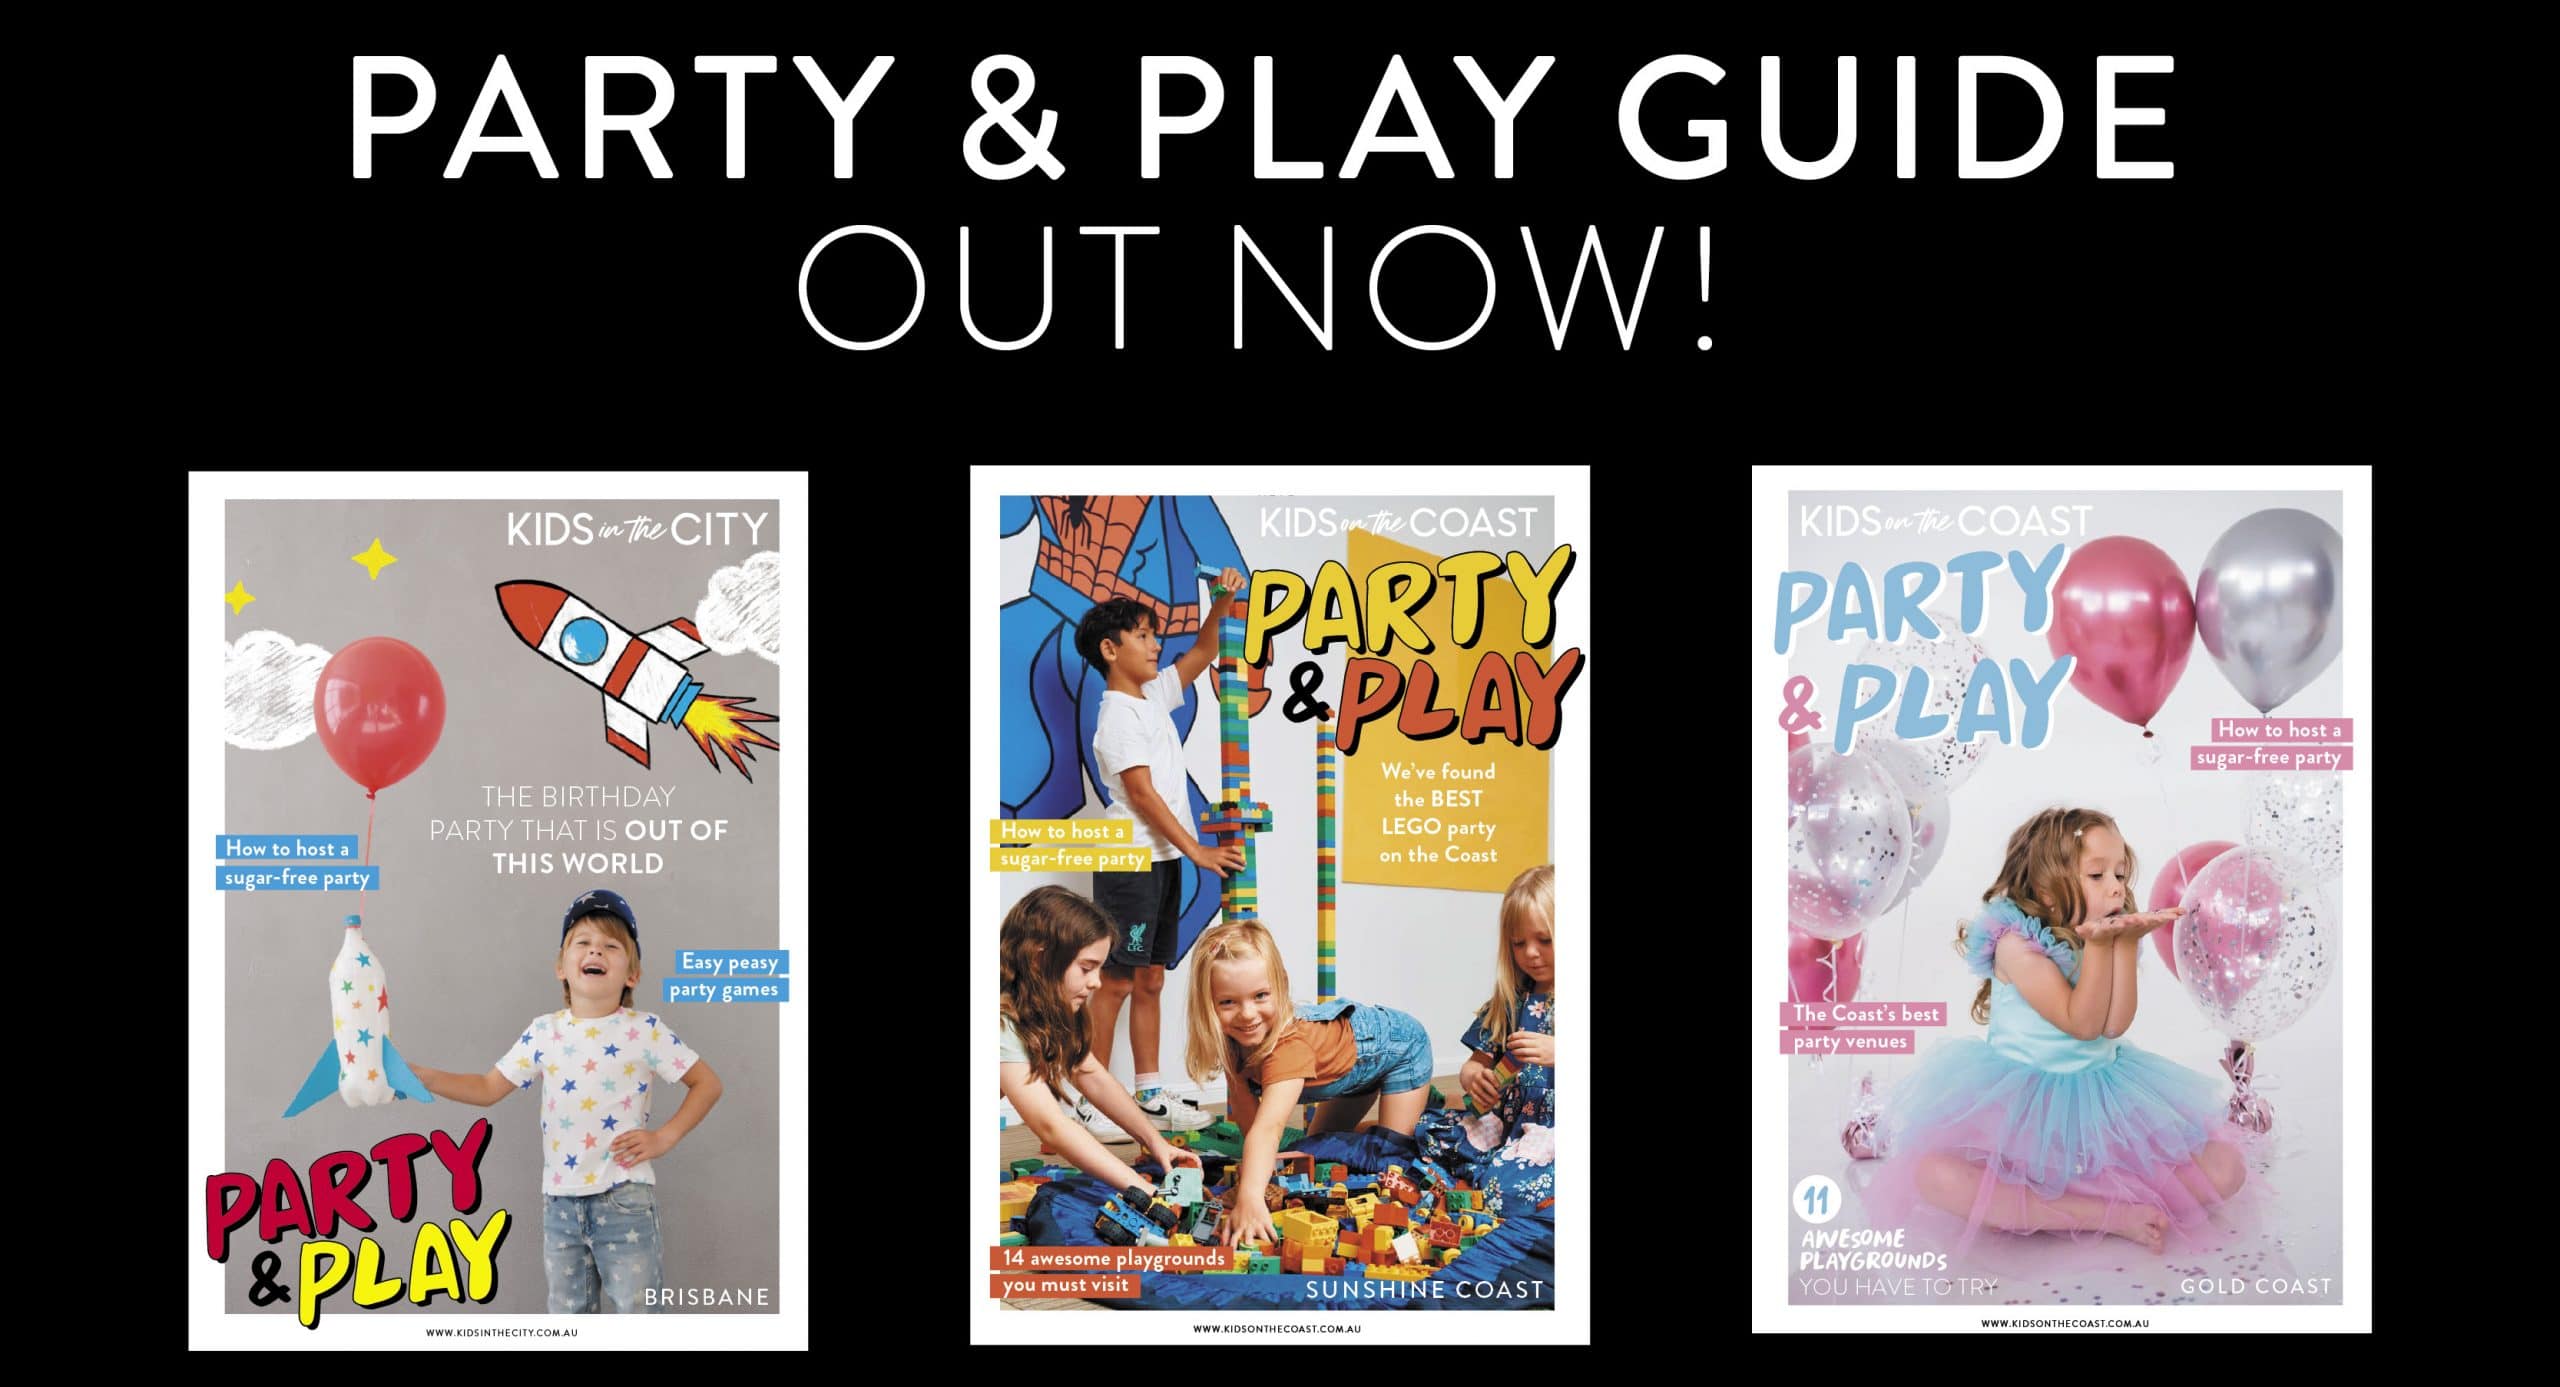 Party and play guide covers